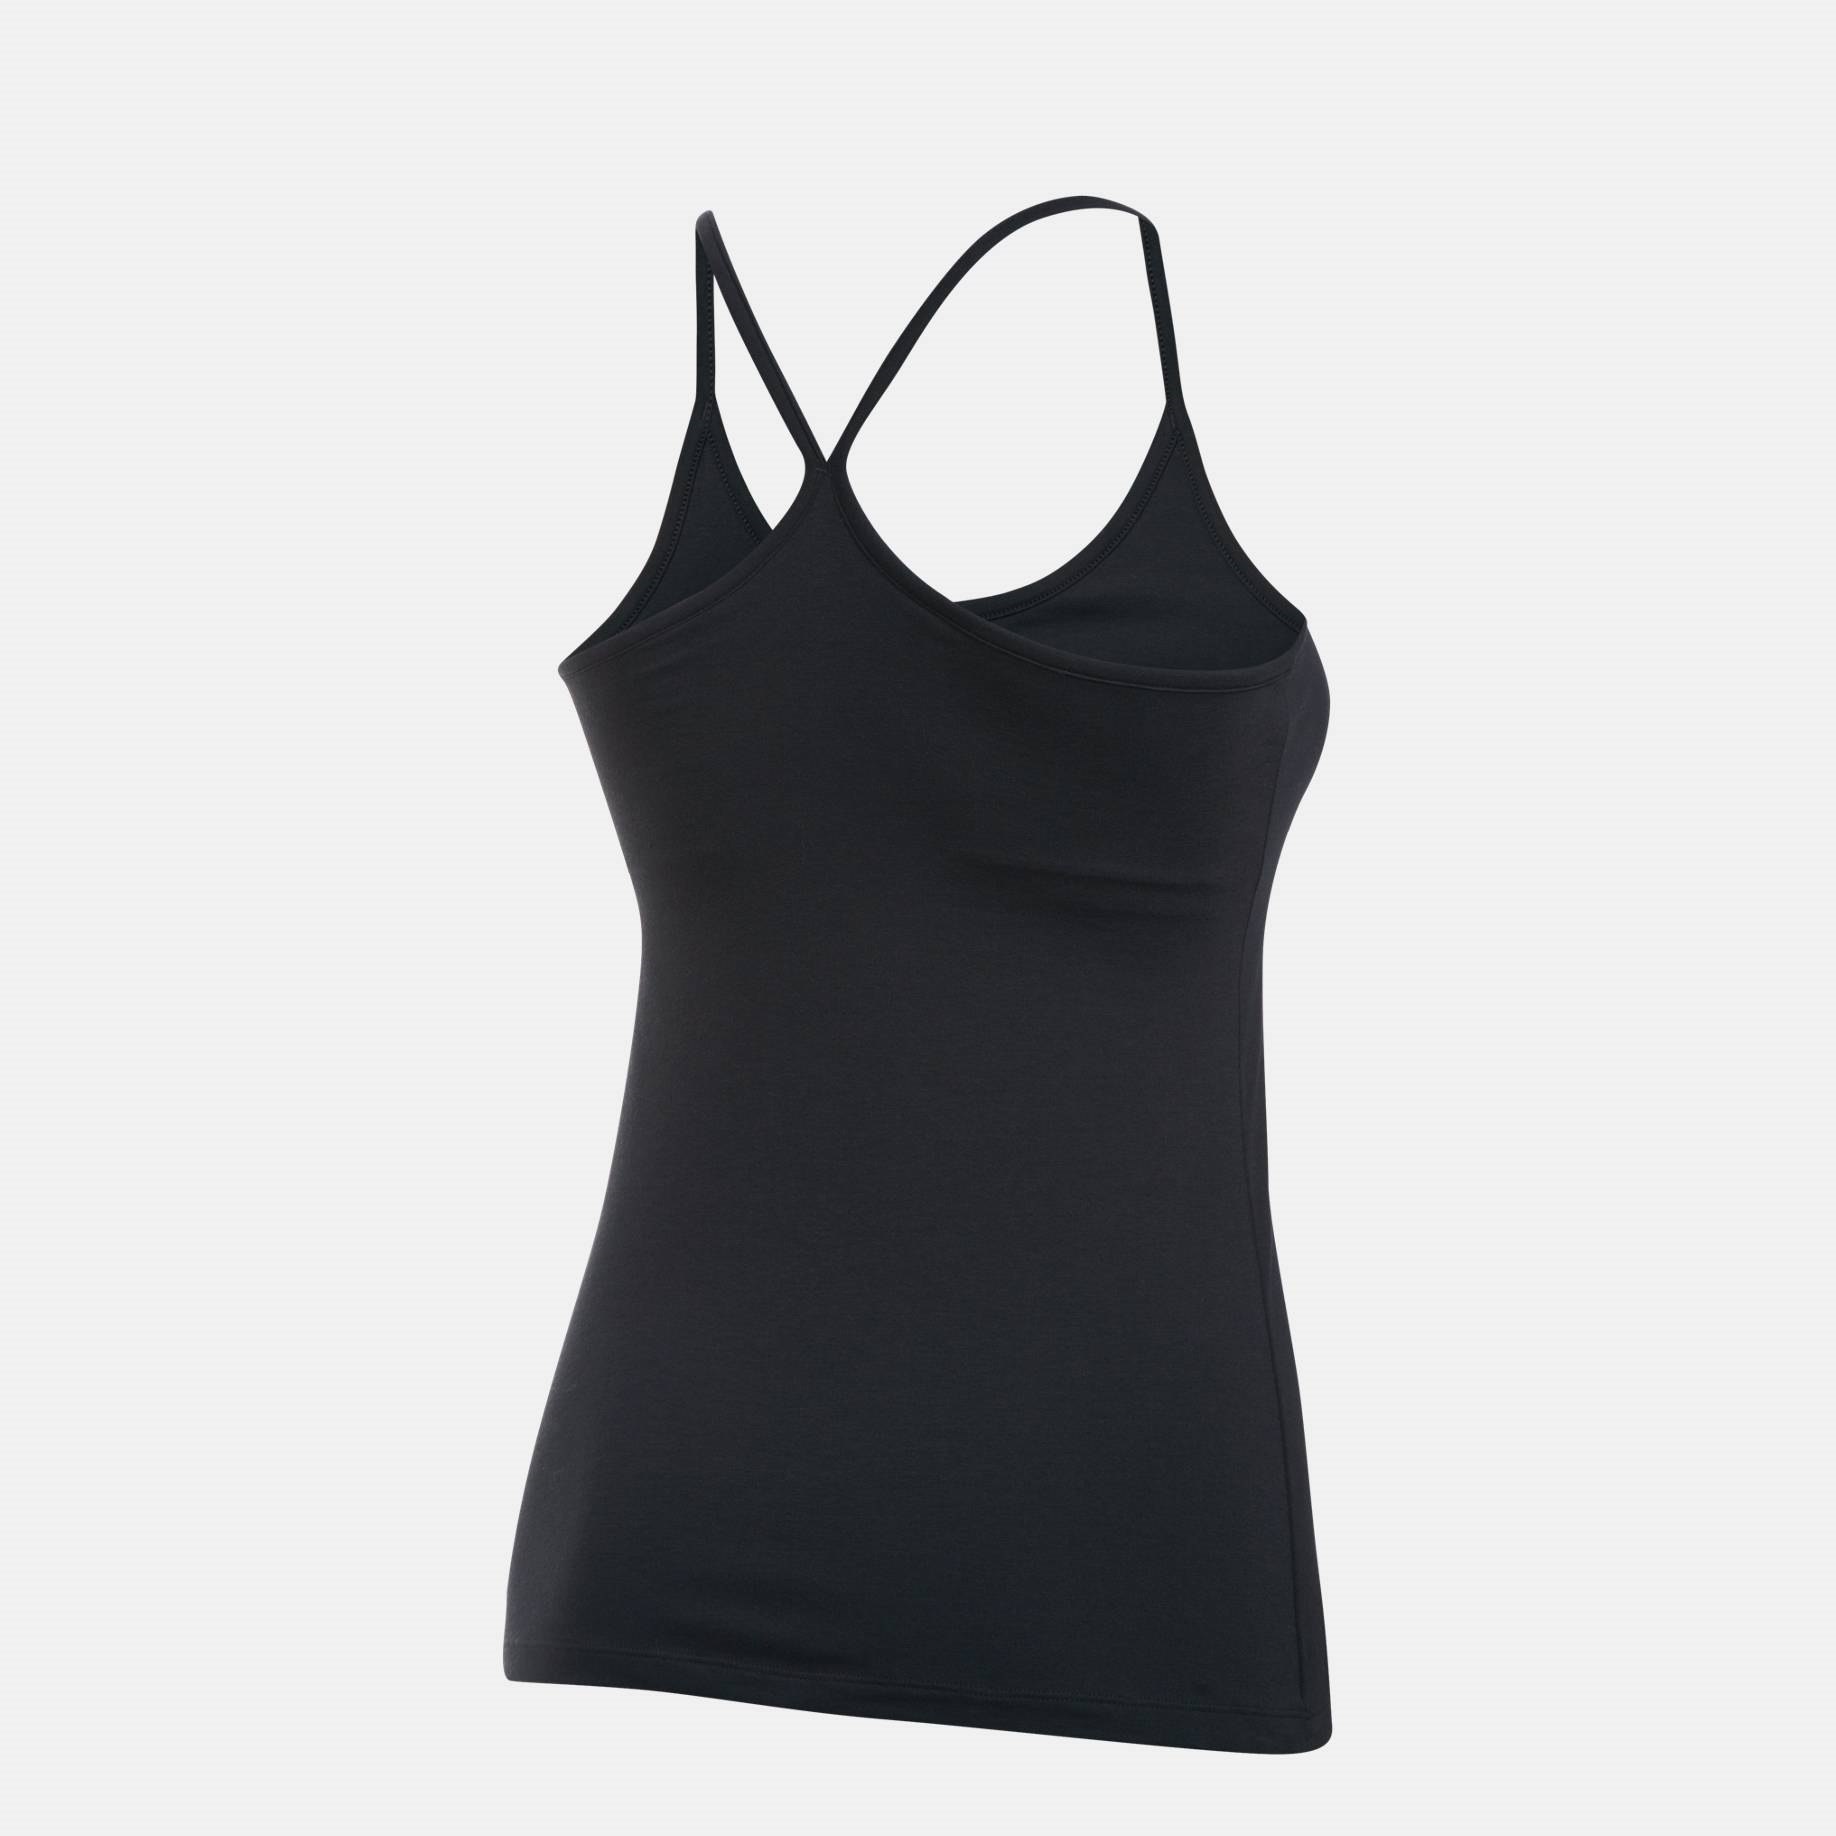  -  under armour Rest Day Cami Tank Top